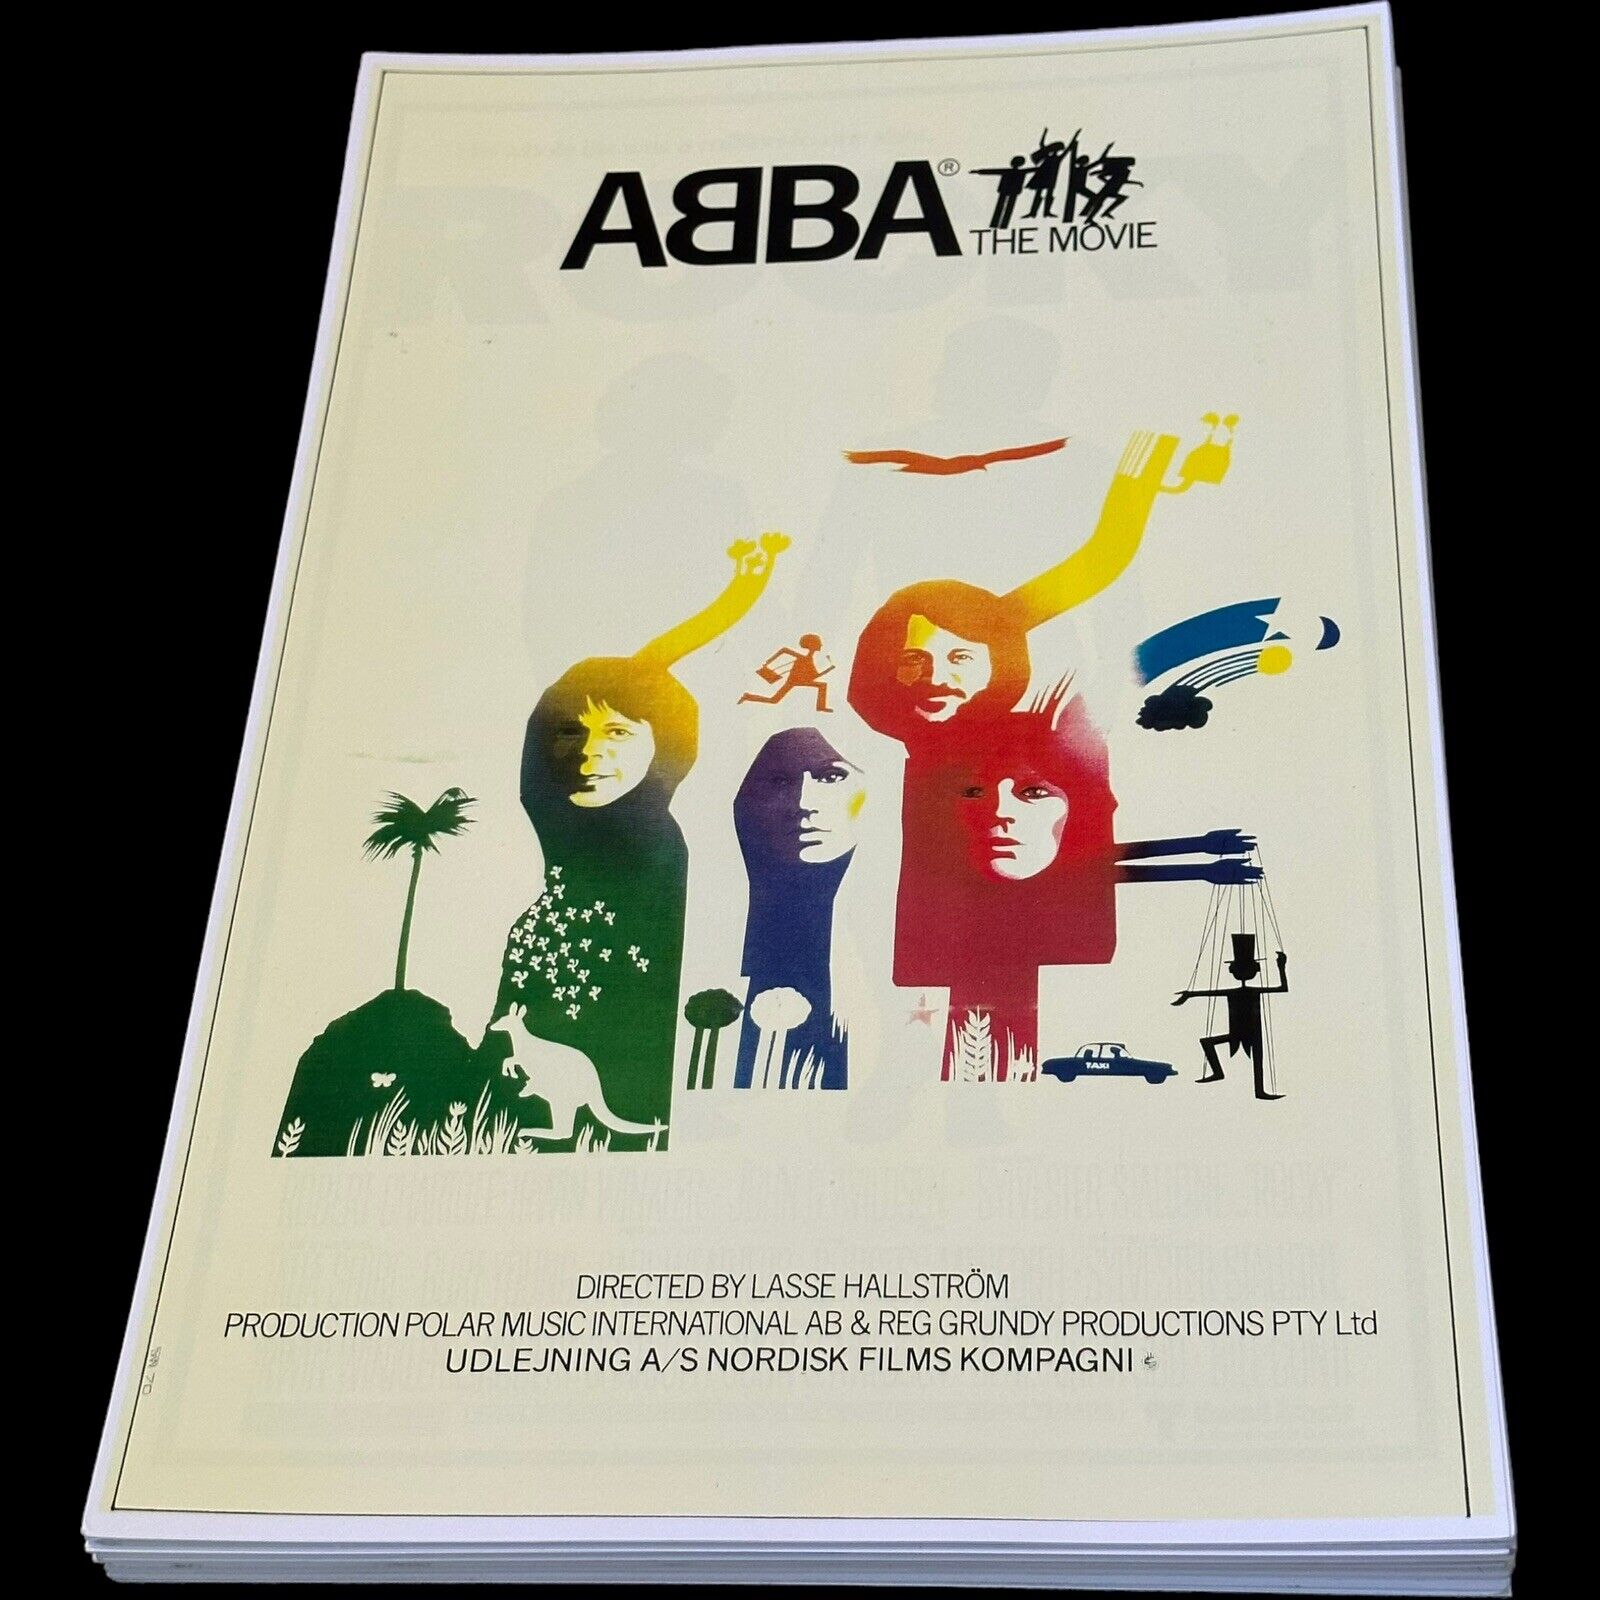 ABBA The Movie Poster 11 x 17